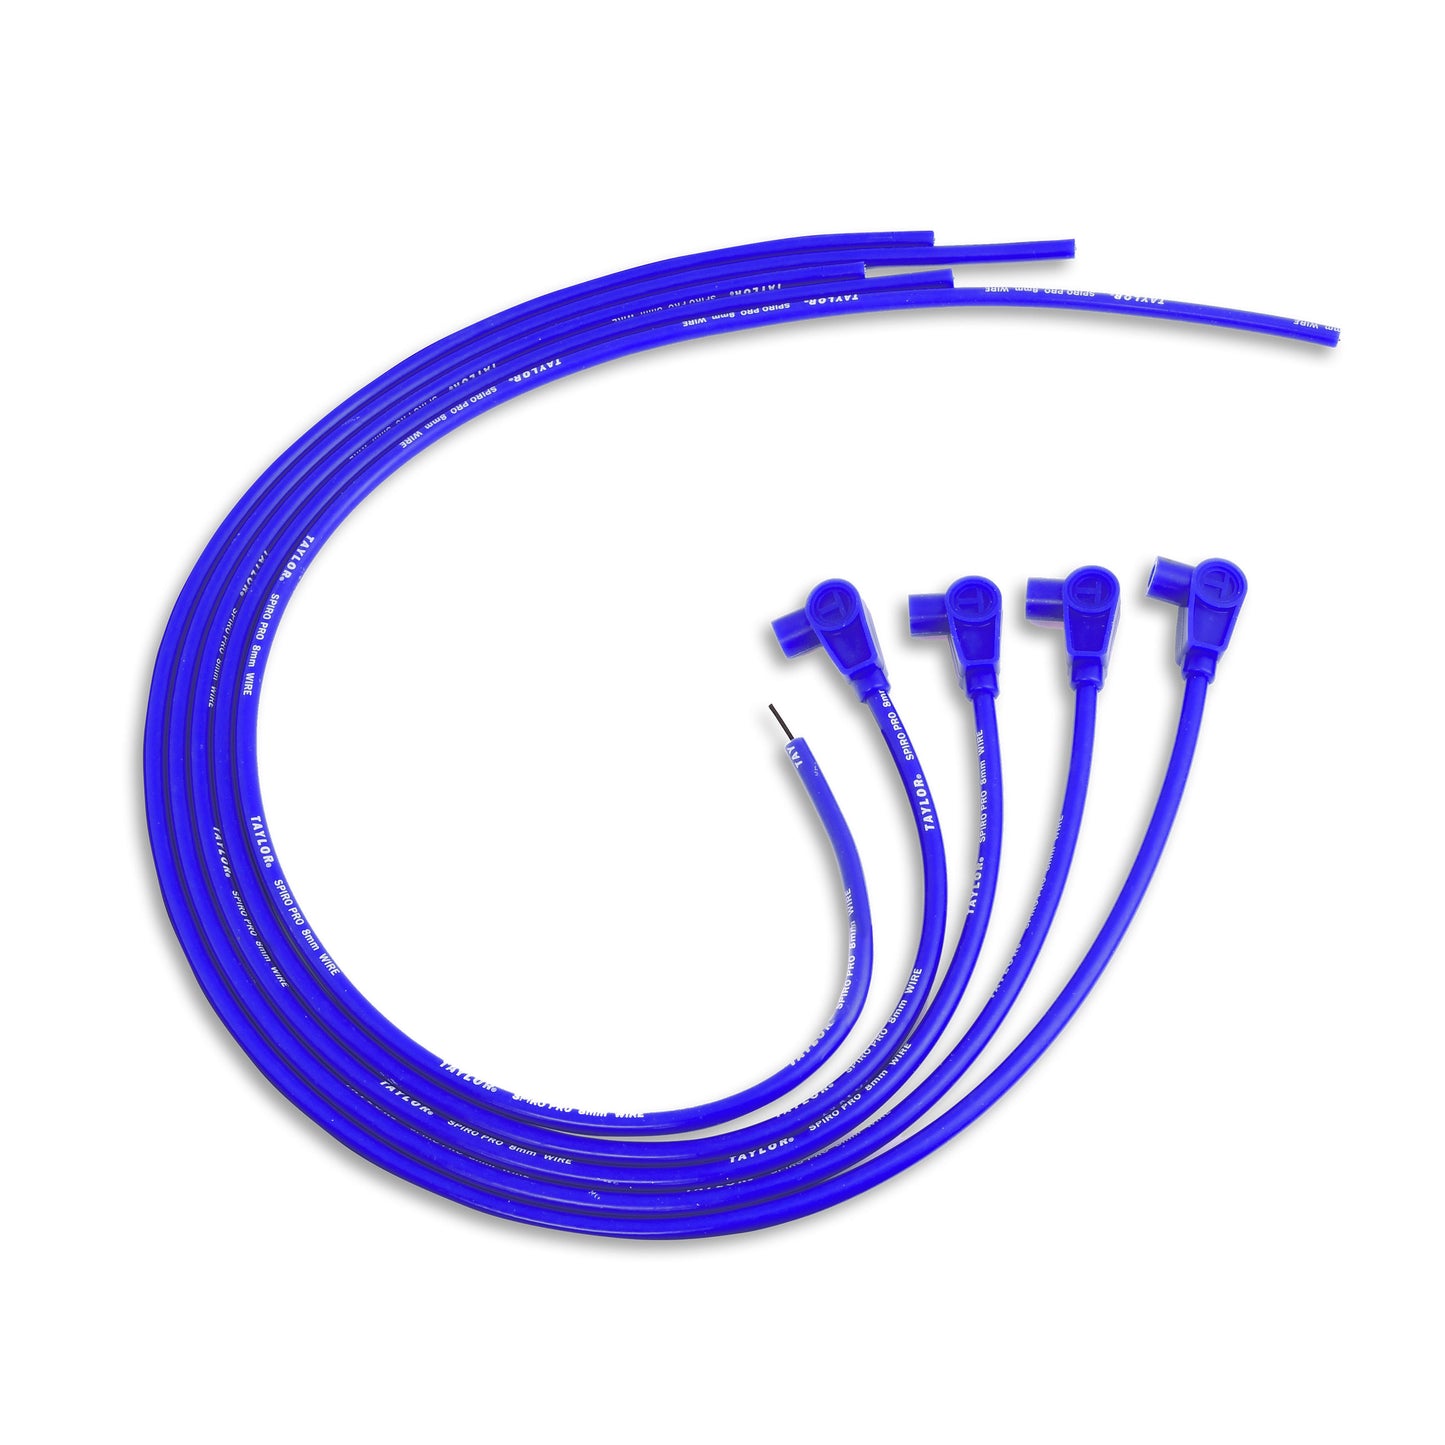 Taylor Cable 73637 8mm Spiro-Pro Ignition Wires univ 4 cyl 90 blue